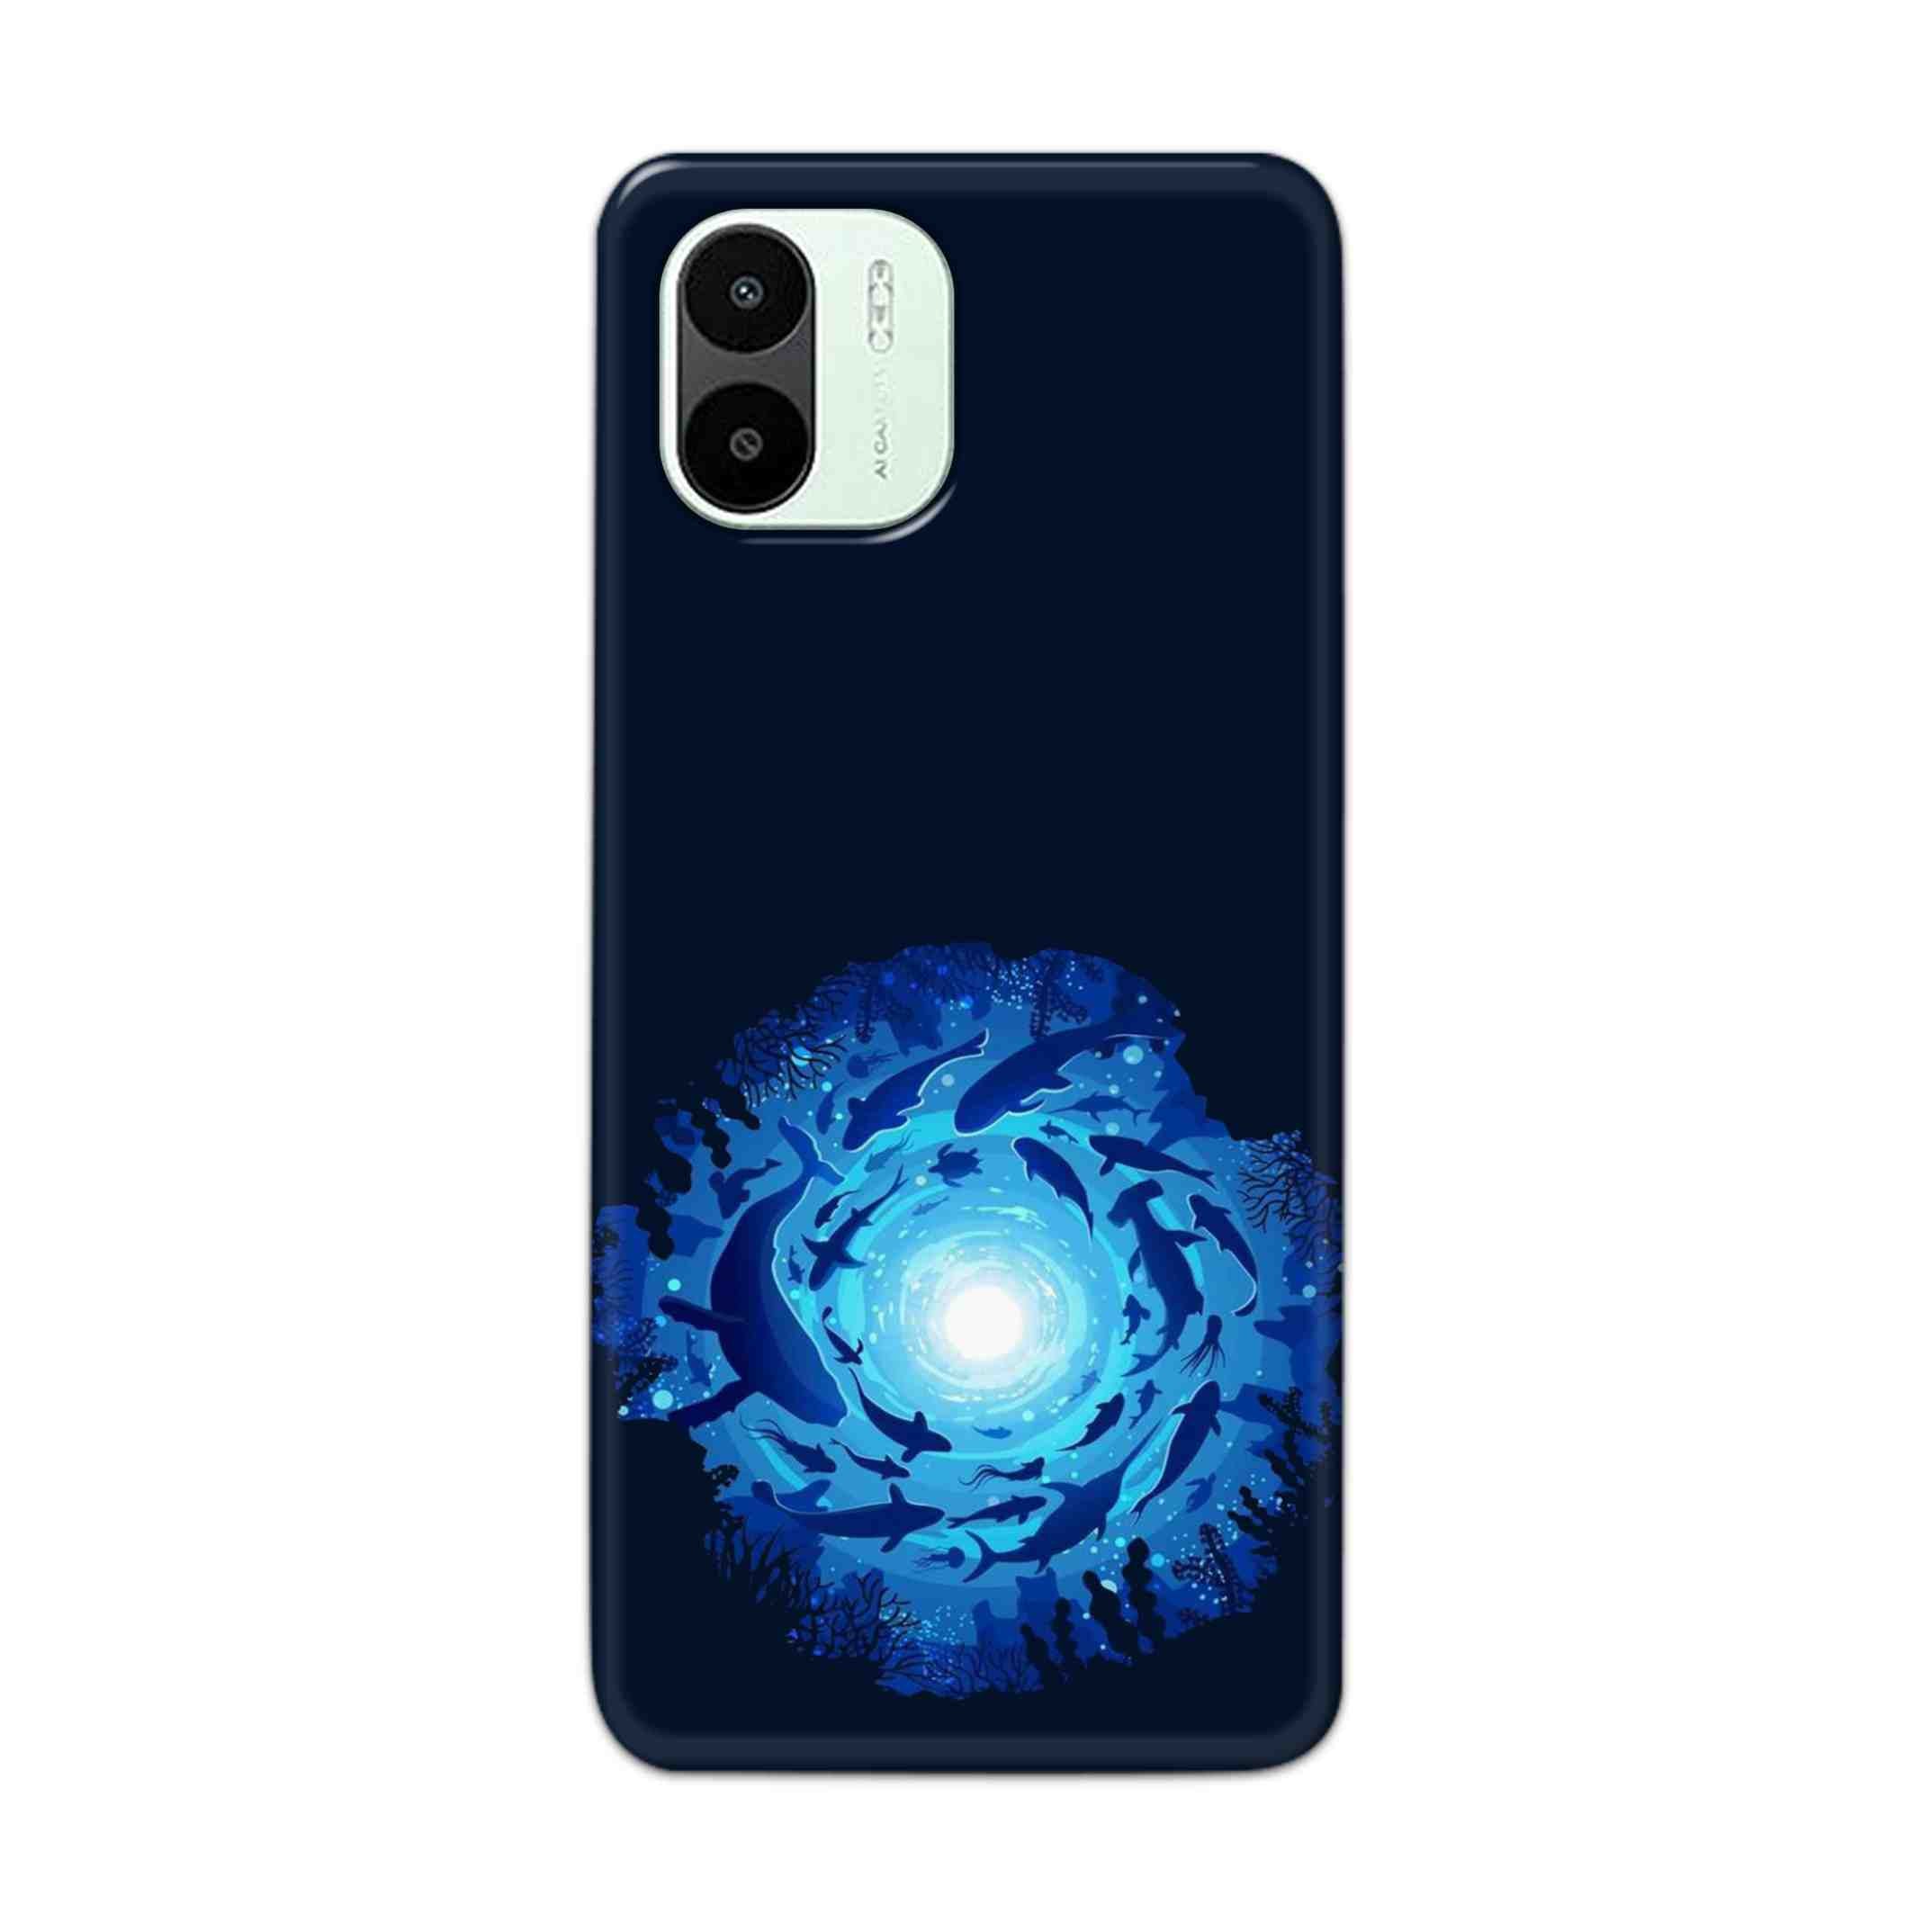 Buy Blue Whale Hard Back Mobile Phone Case Cover For Xiaomi Redmi A1 5G Online